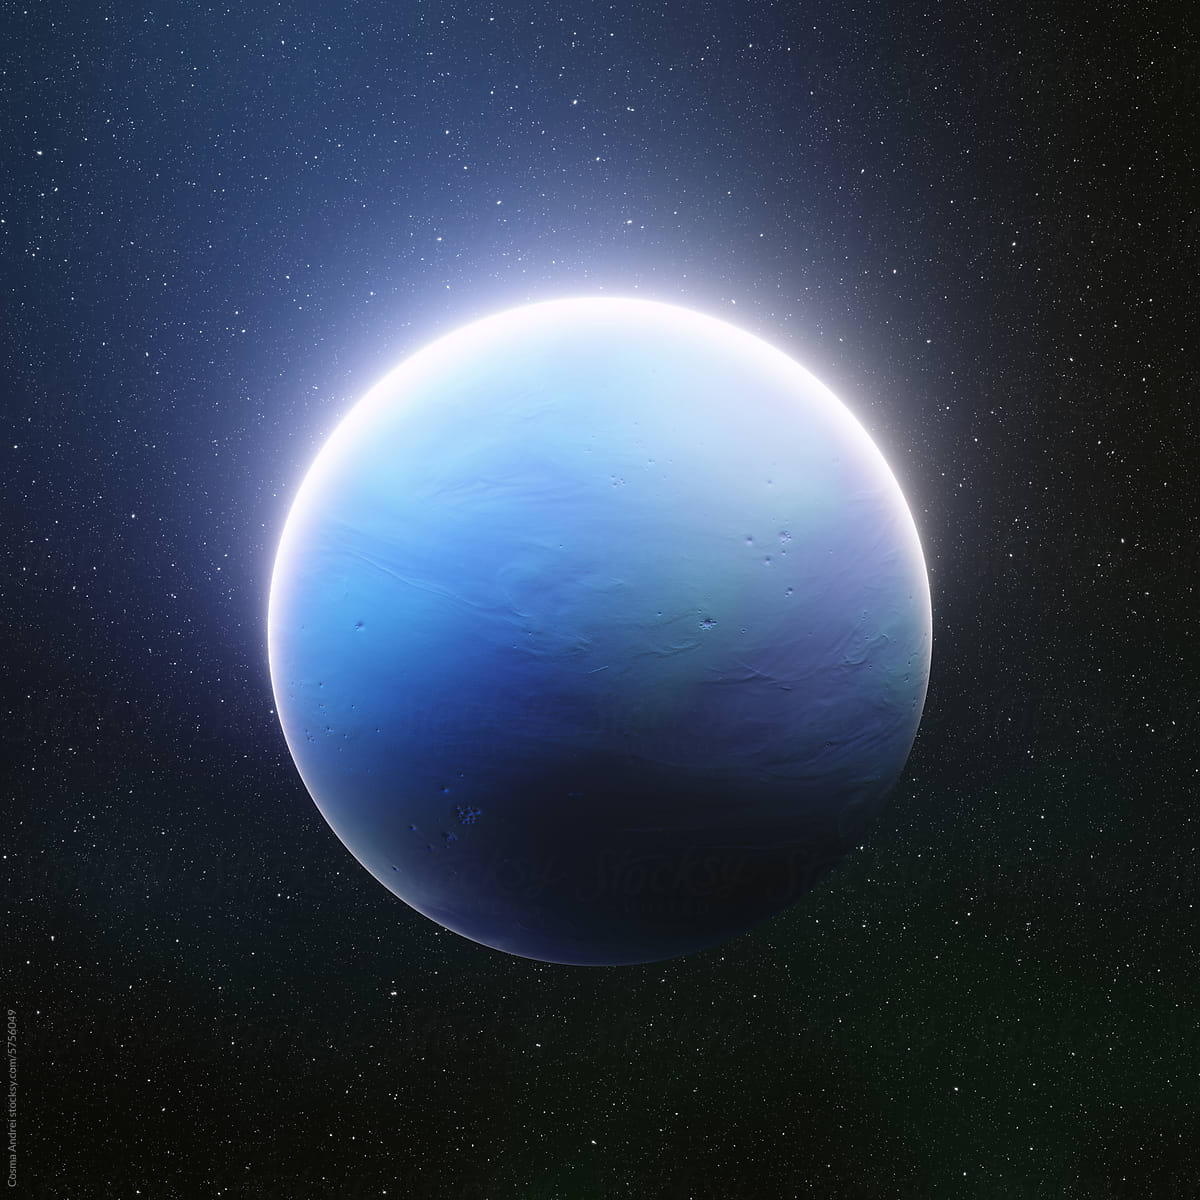 Sci-fi illustration with blue planet